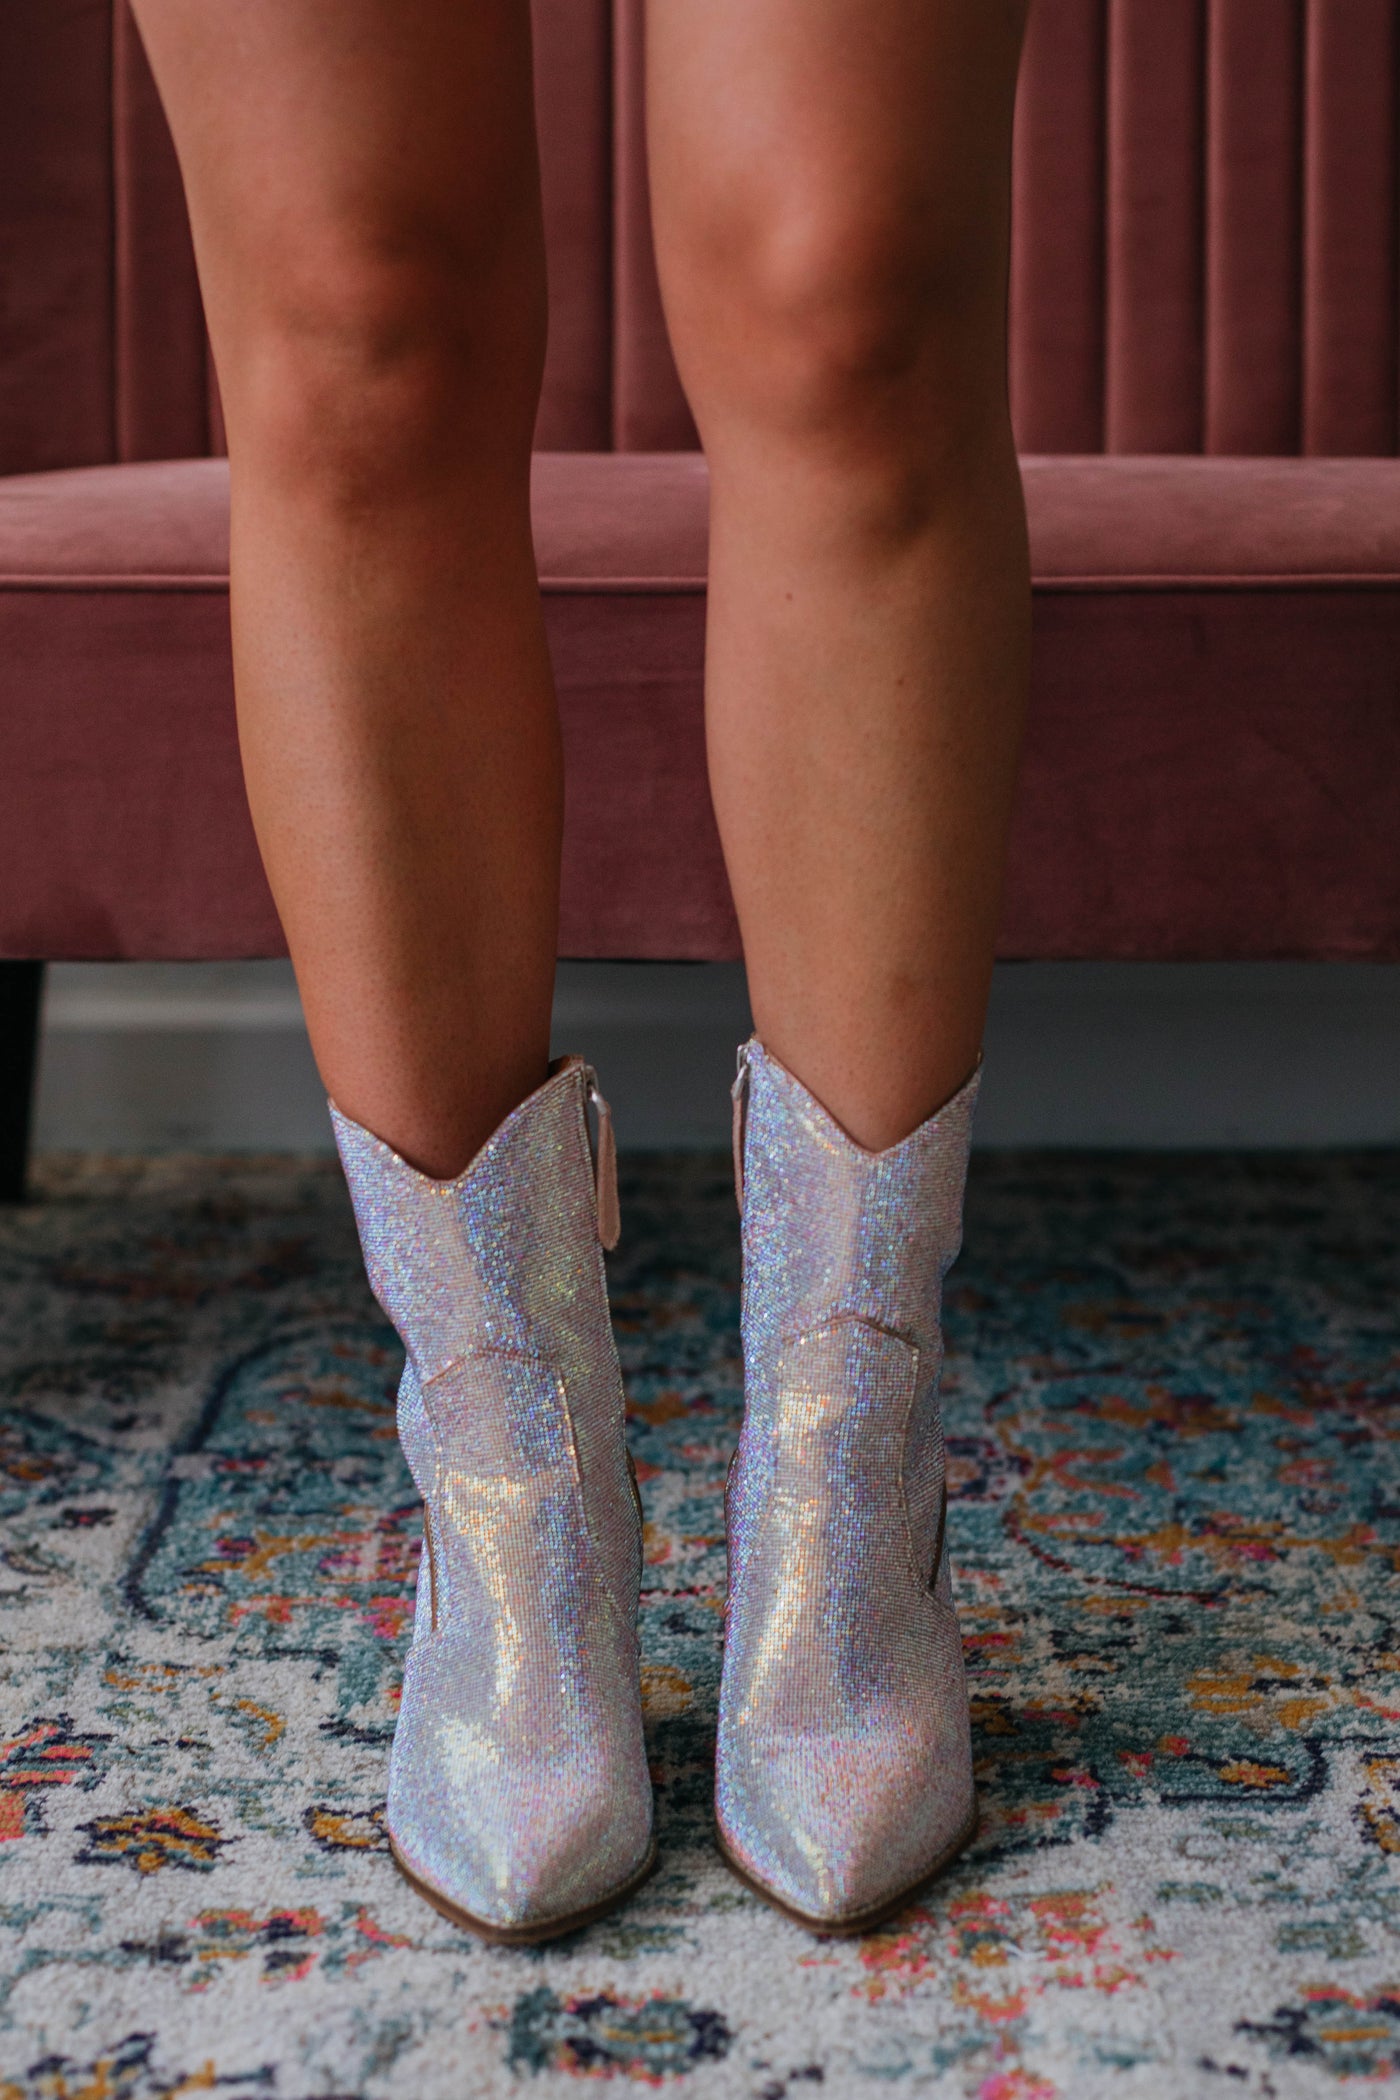 My Kinda Party Boots